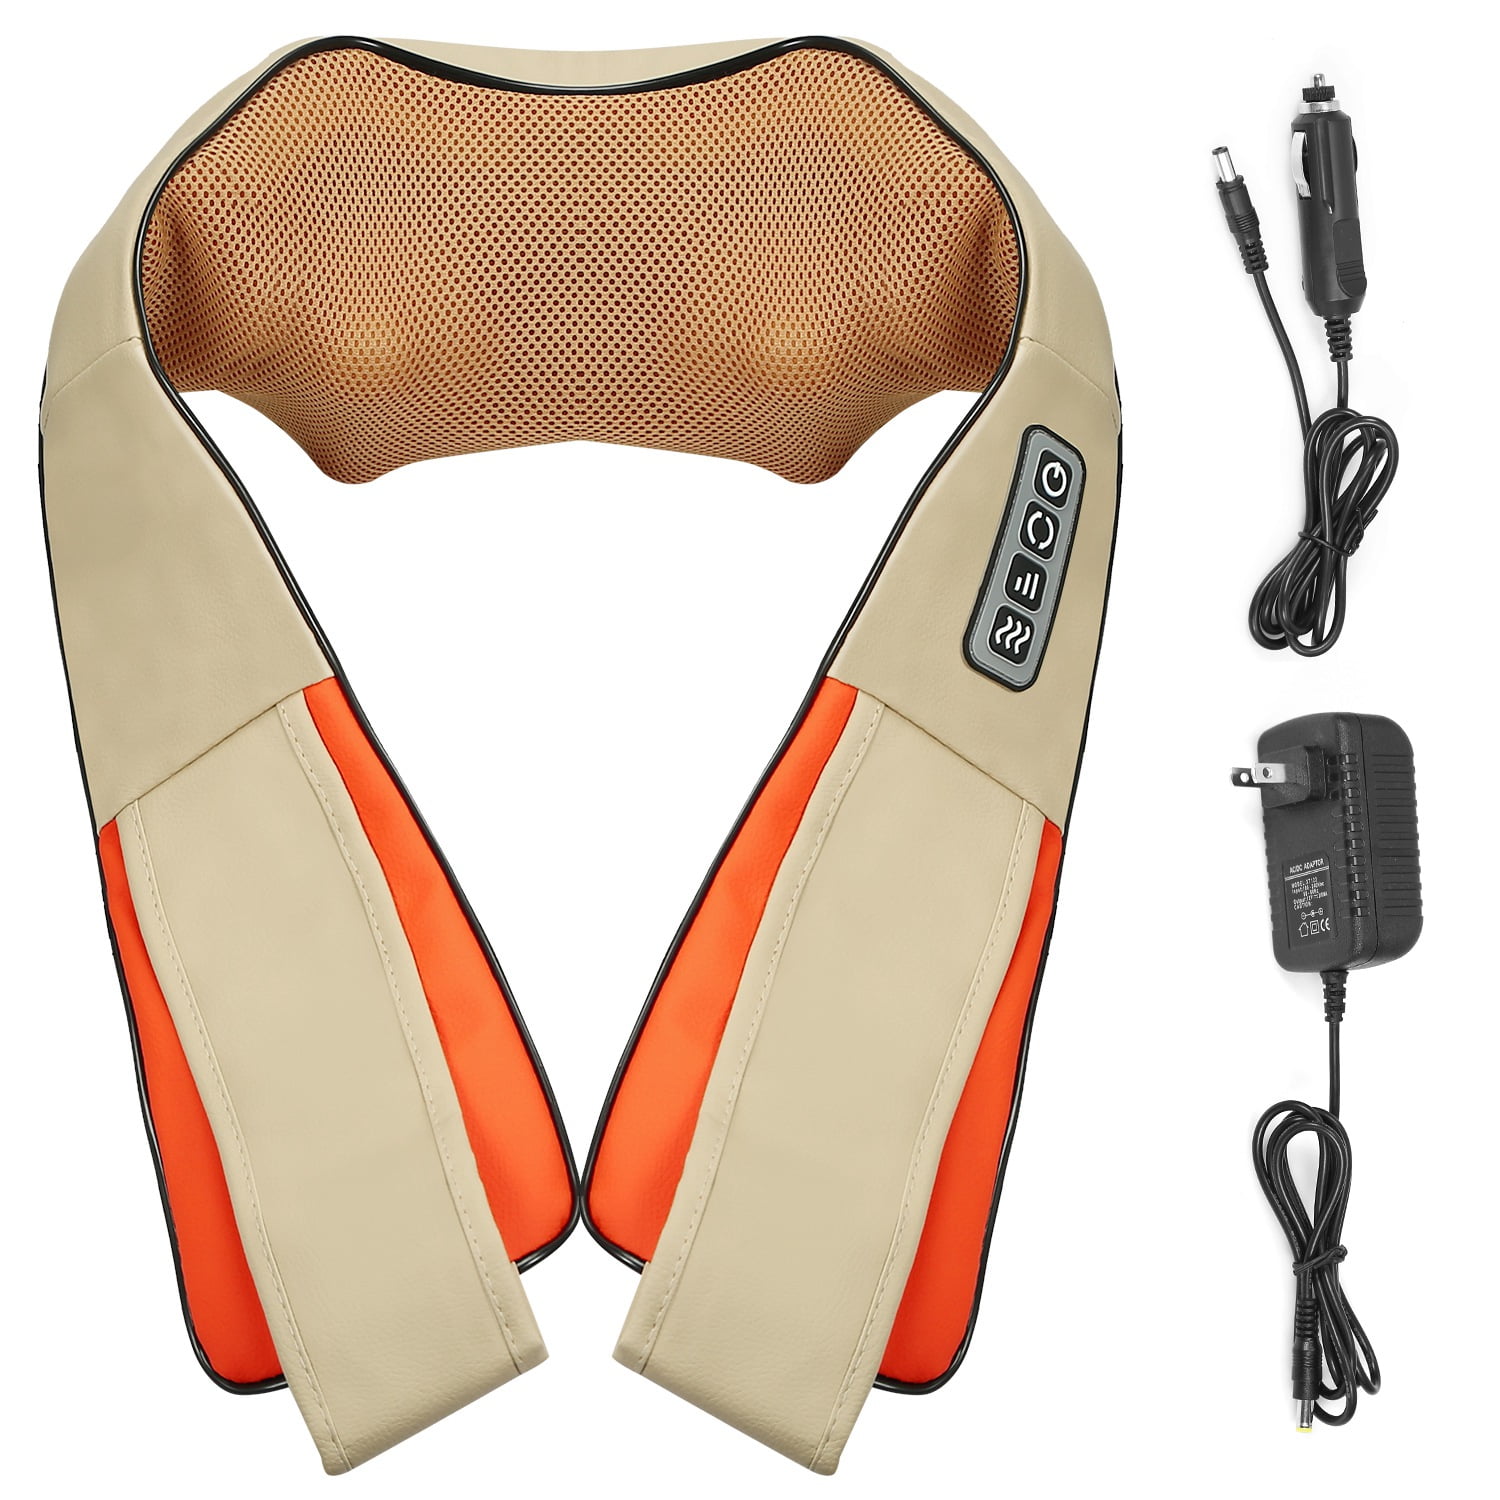 CosyTown Neck Massager with Heat for Neck Pain Relief with 6 Modes of  Intensity,Perfect for Neck Mus…See more CosyTown Neck Massager with Heat  for